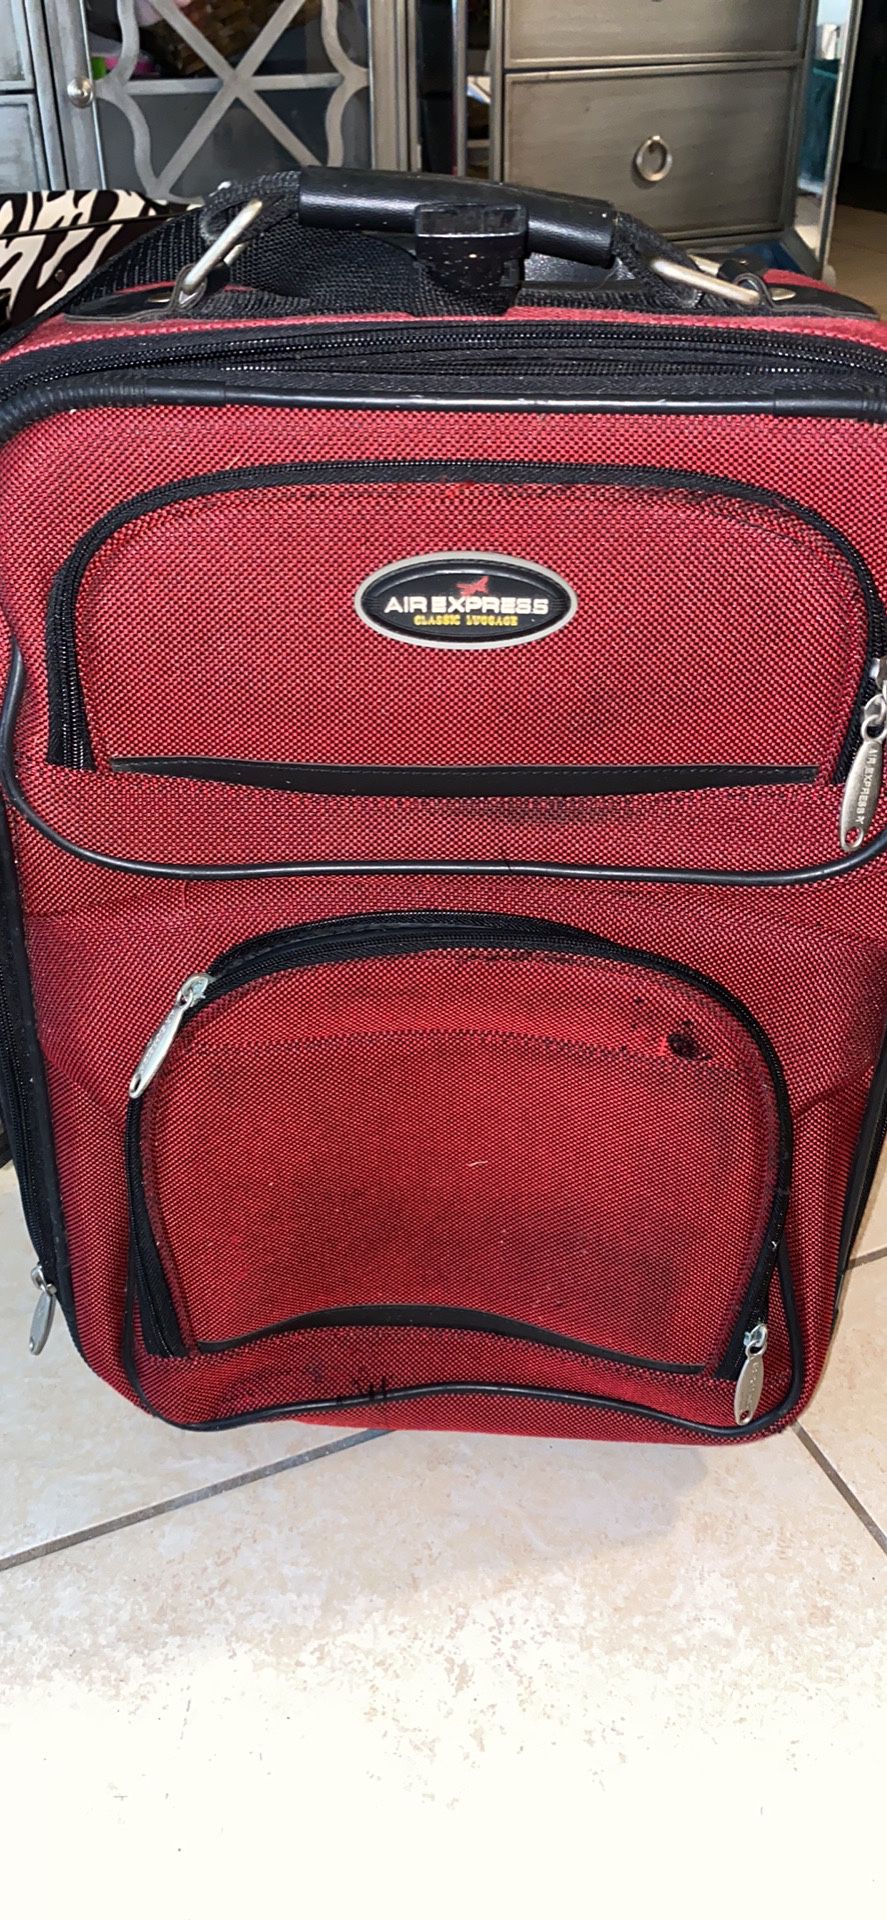 Carry On Air Express Classic Luggage